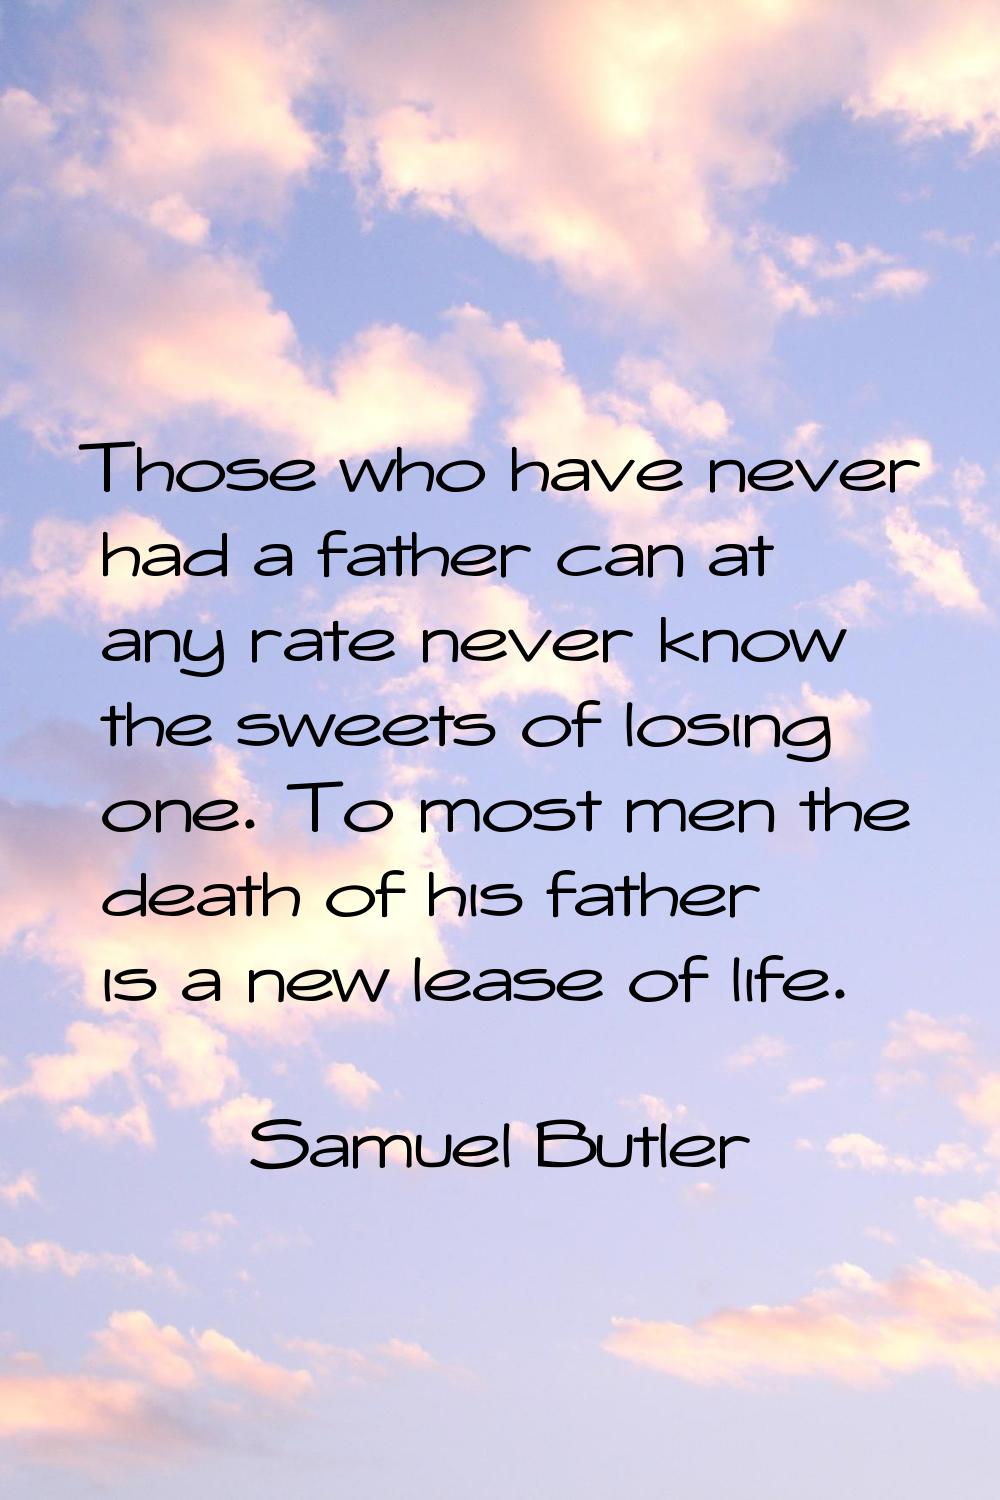 Those who have never had a father can at any rate never know the sweets of losing one. To most men 